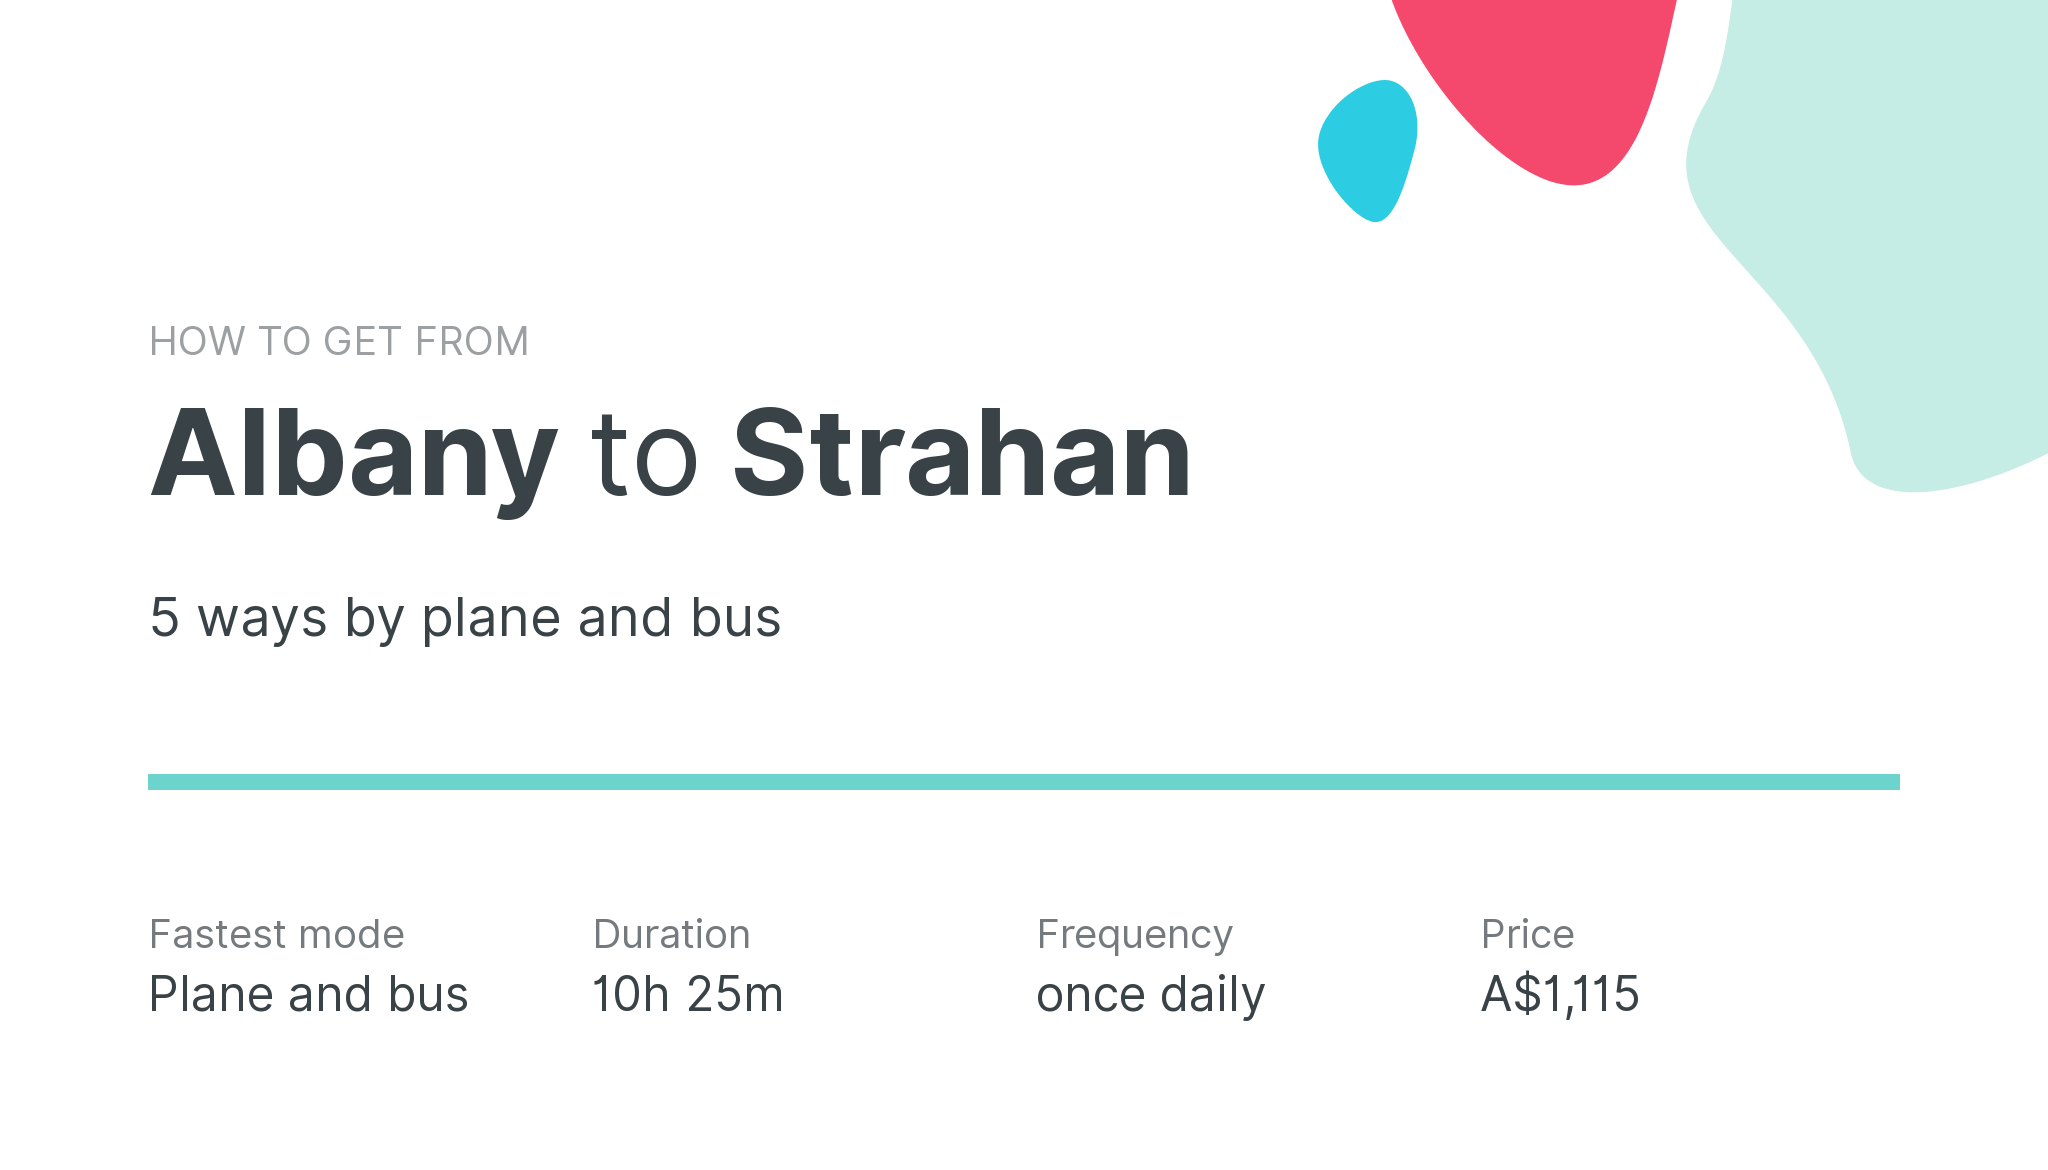 How do I get from Albany to Strahan